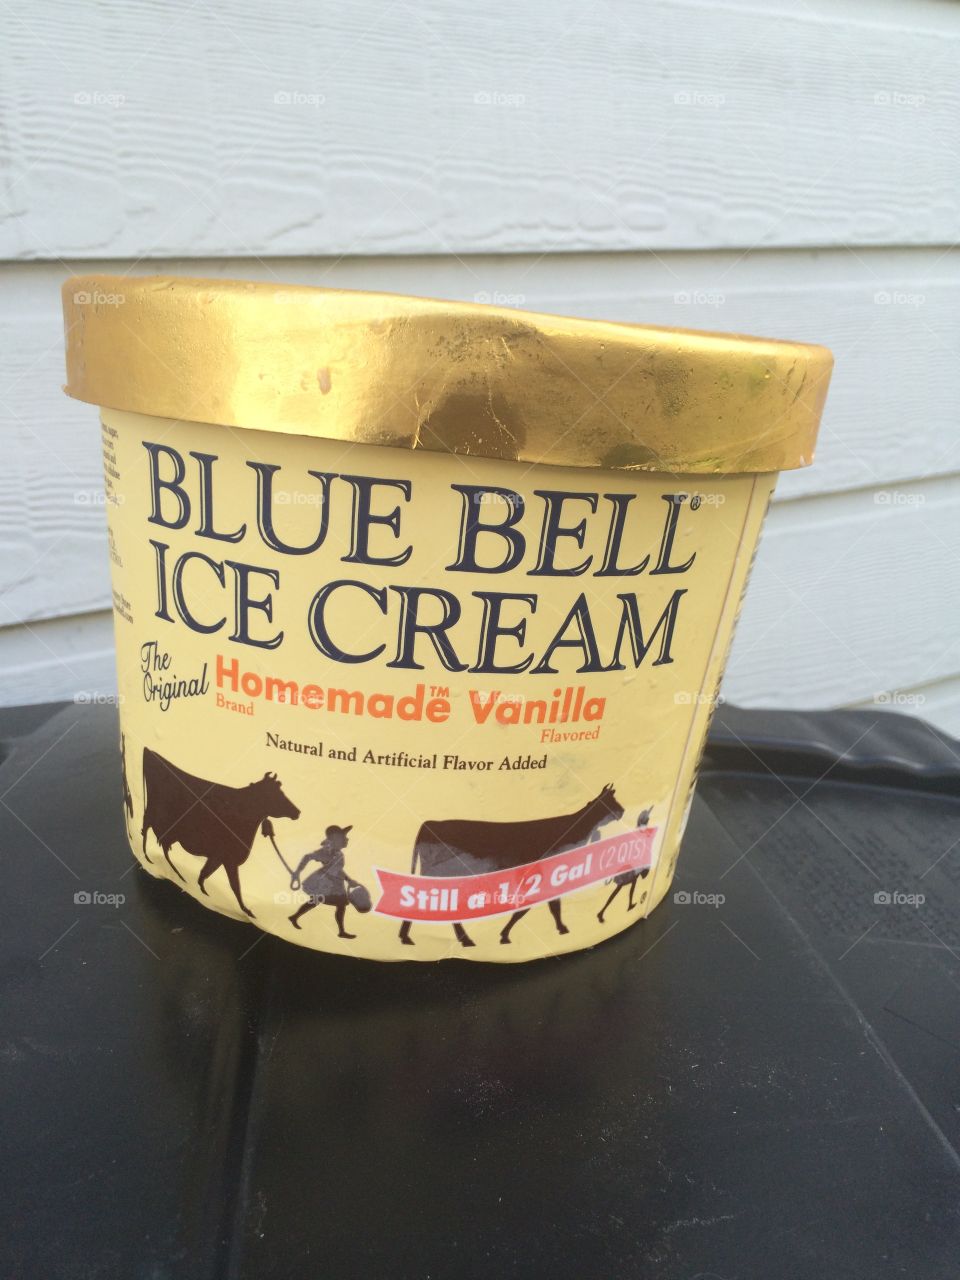 Ice Cream. Bought my first gallon of the "new" blue bell. Enjoyed it.